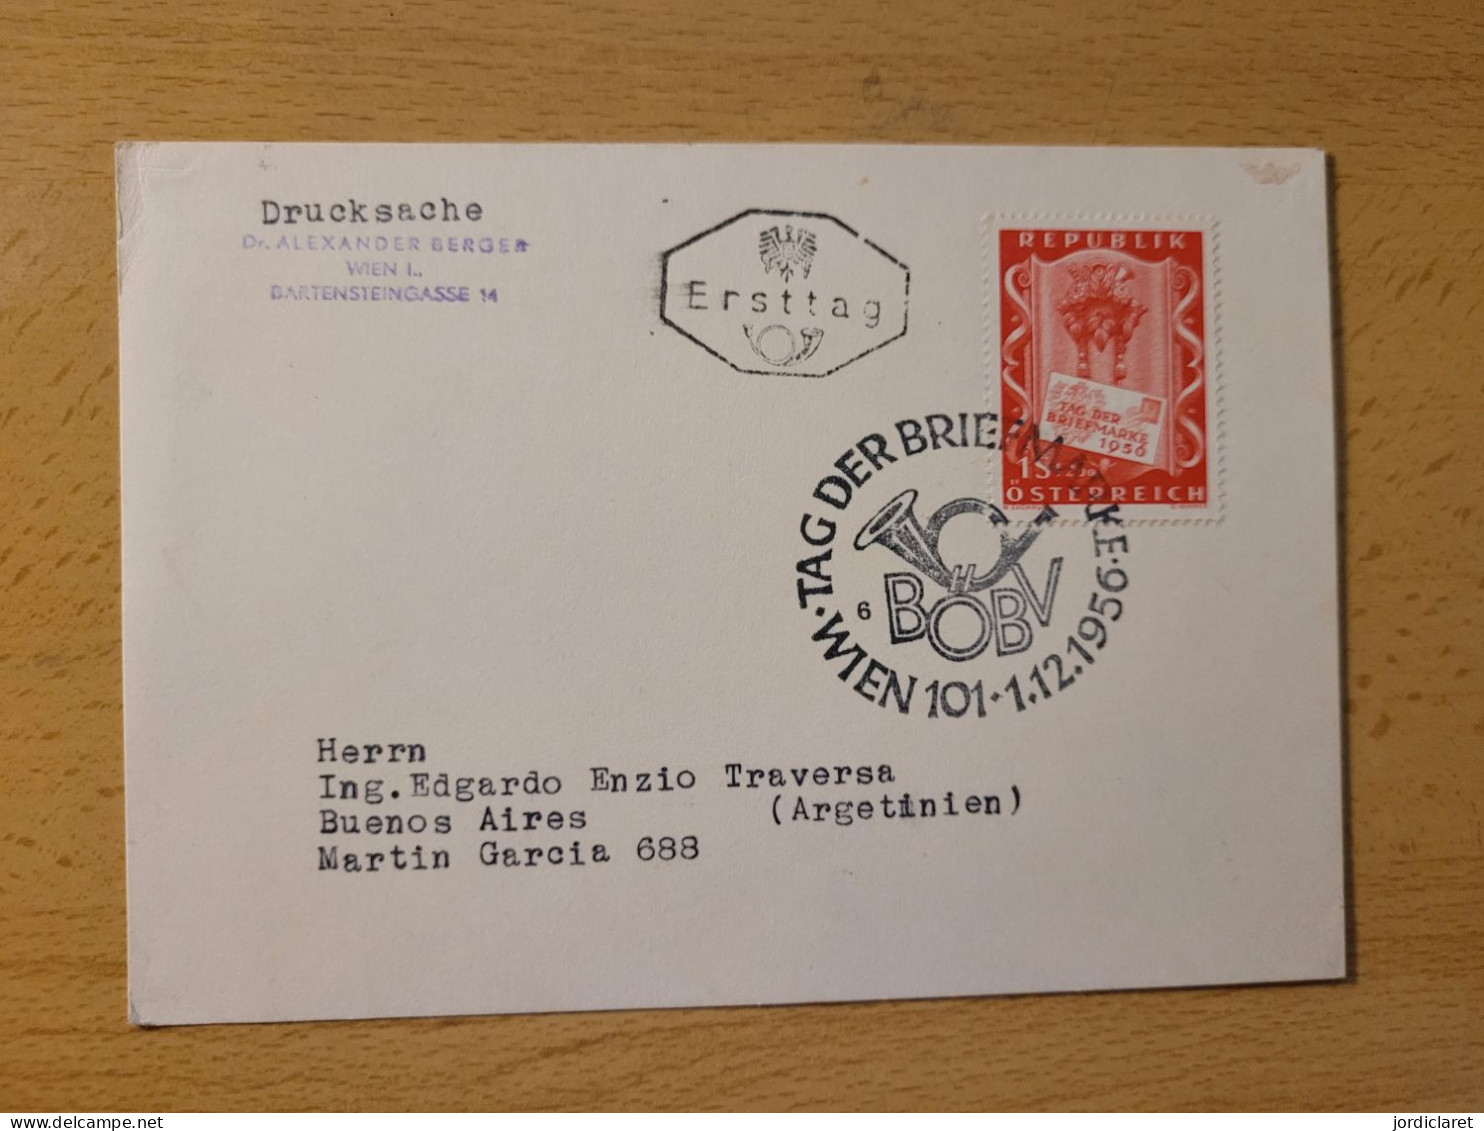 FDC 1956 - FDC